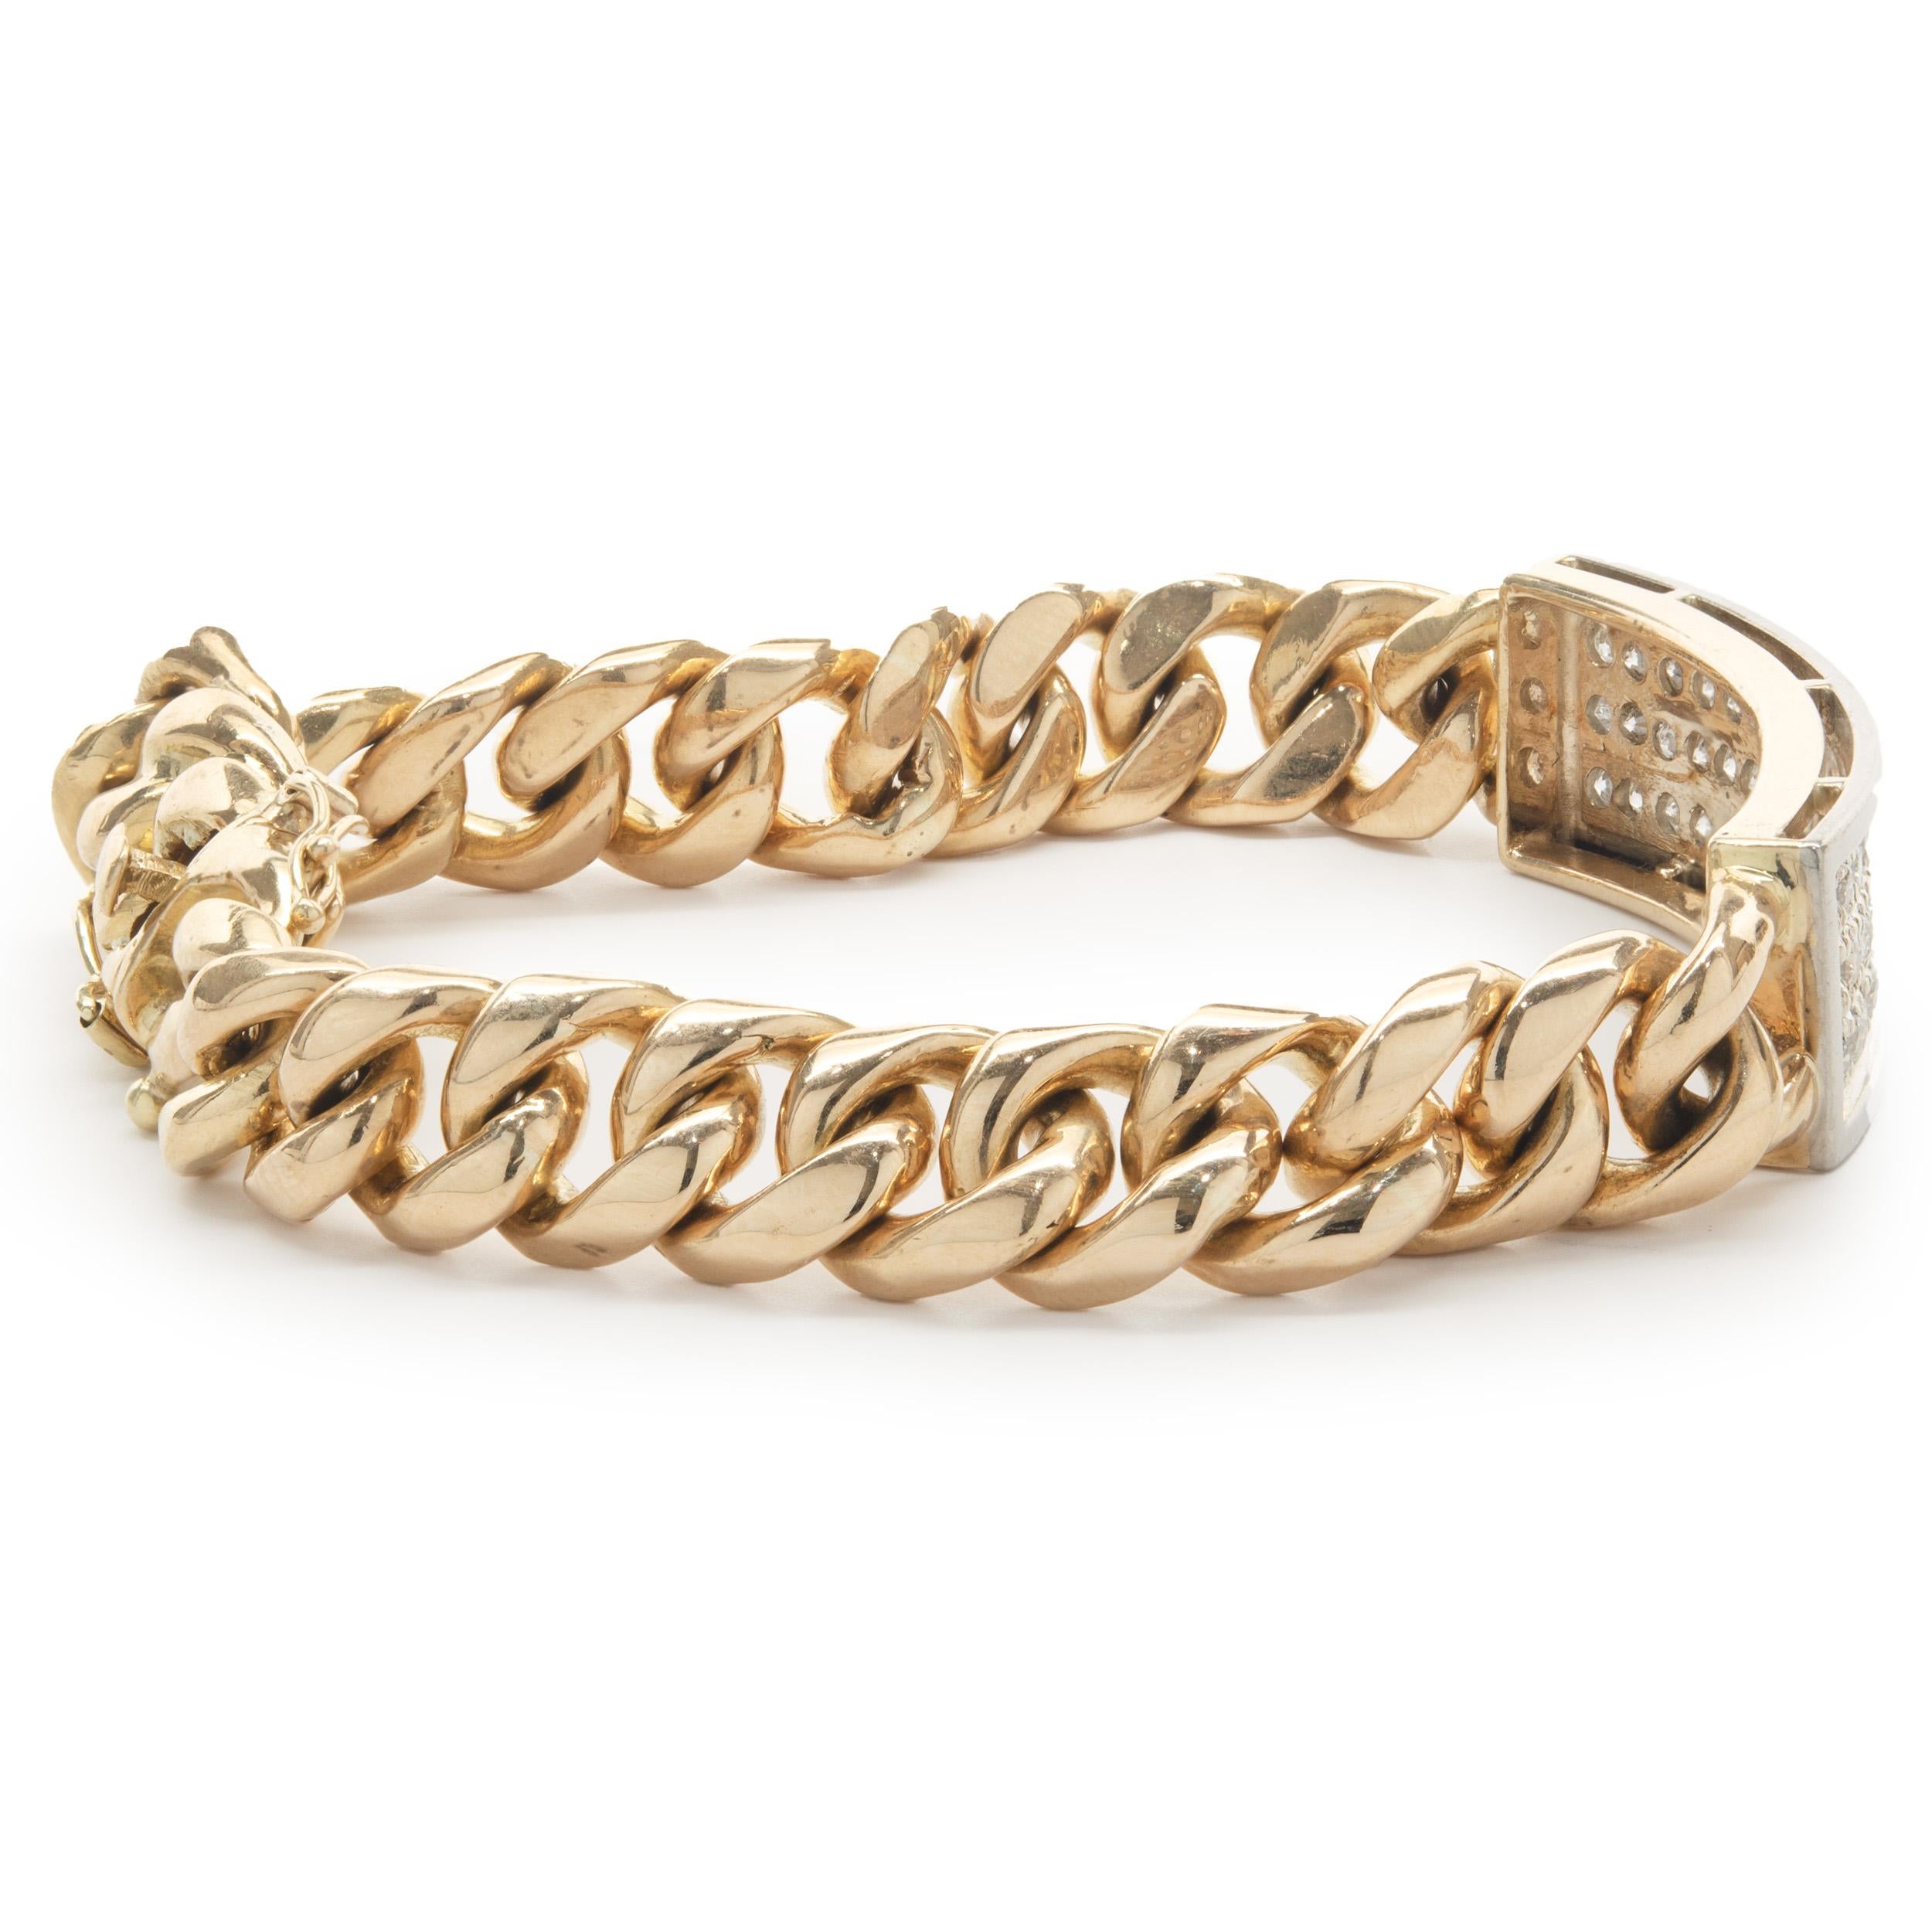 Designer: custom design
Material: 14K yellow & white gold
Diamond: 67 round brilliant cut = 3.35cttw
Color: G / H
Clarity: SI1
Dimensions: bracelet measures 7.75-inches in length
Weight: 23.29 grams